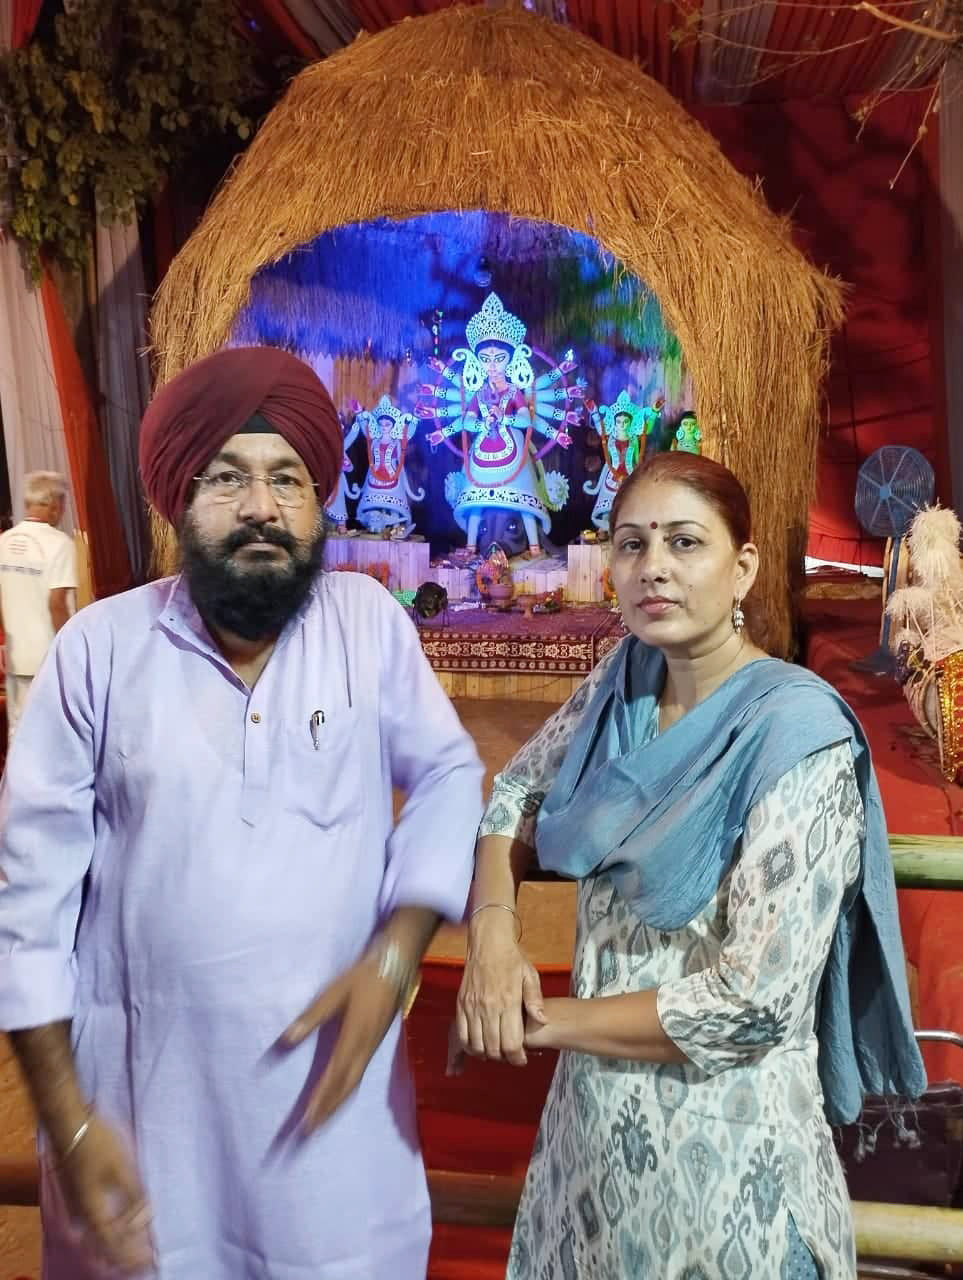 A sikh family during durga pooja in India